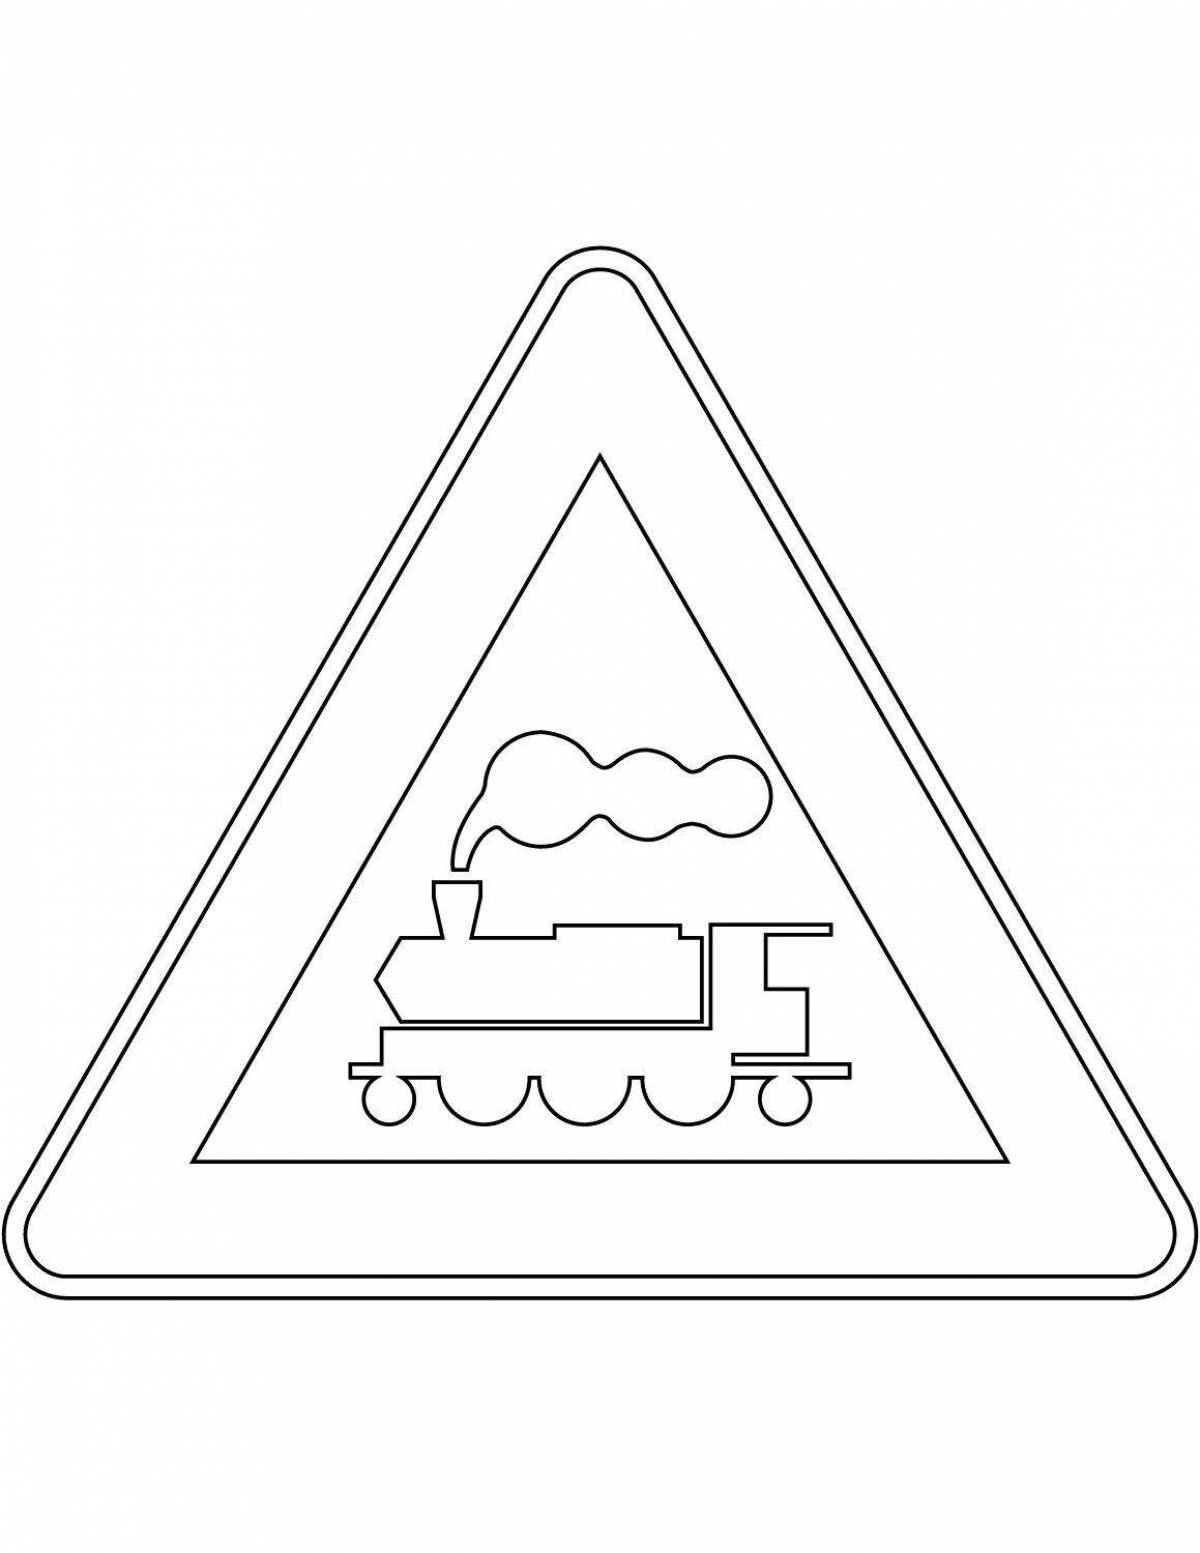 Railway safety signs #6